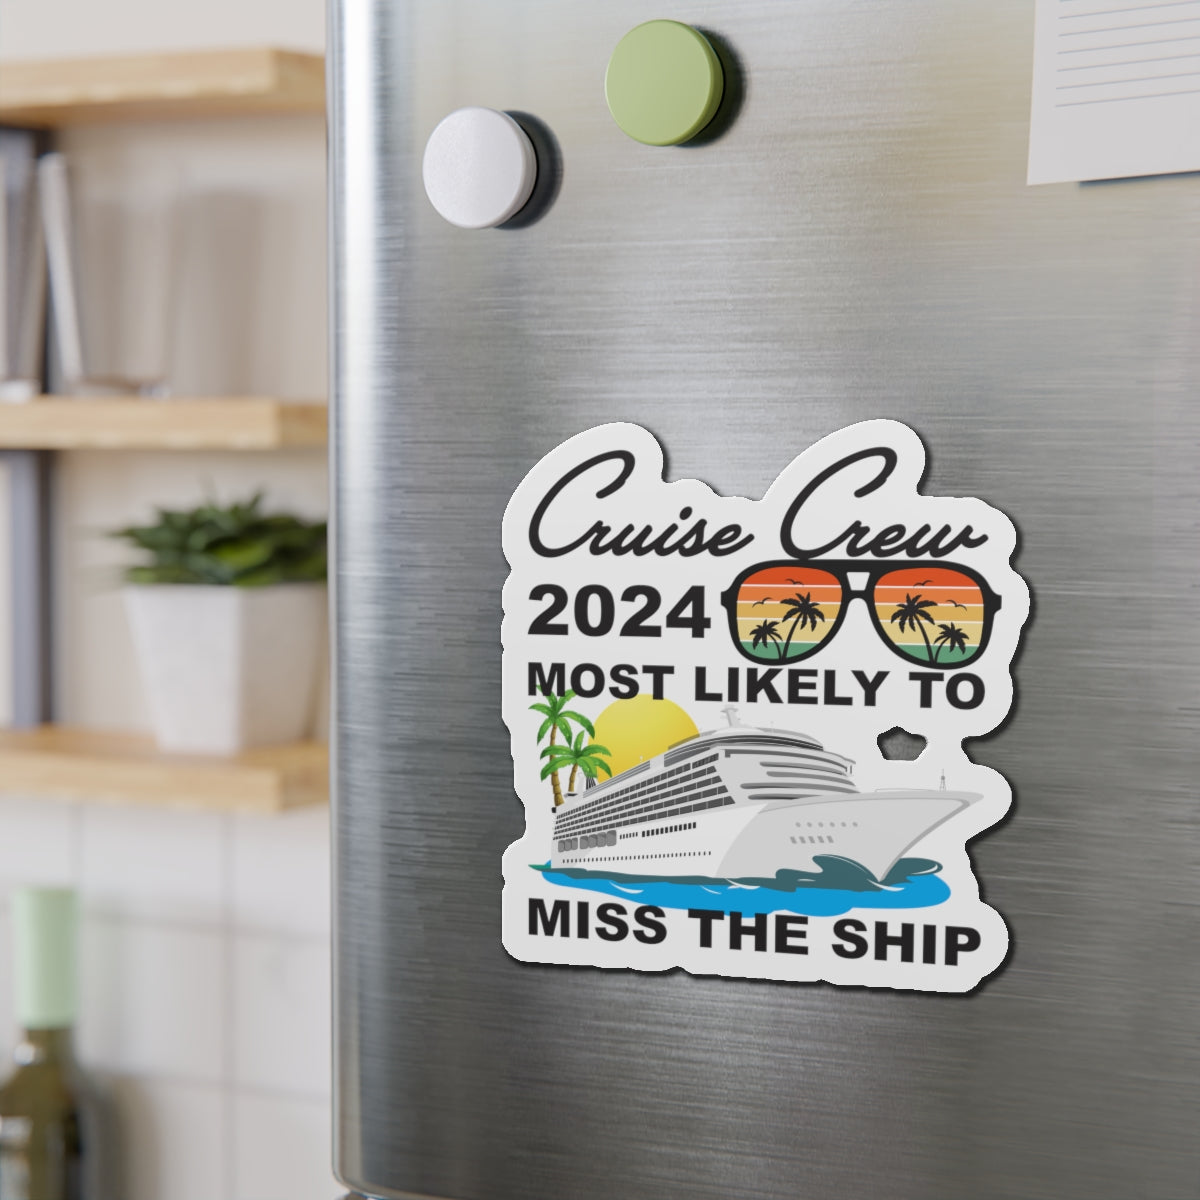 Cruise Crew 2024–Most Likely To Miss The Ship–Cruise Ship Door Magnets